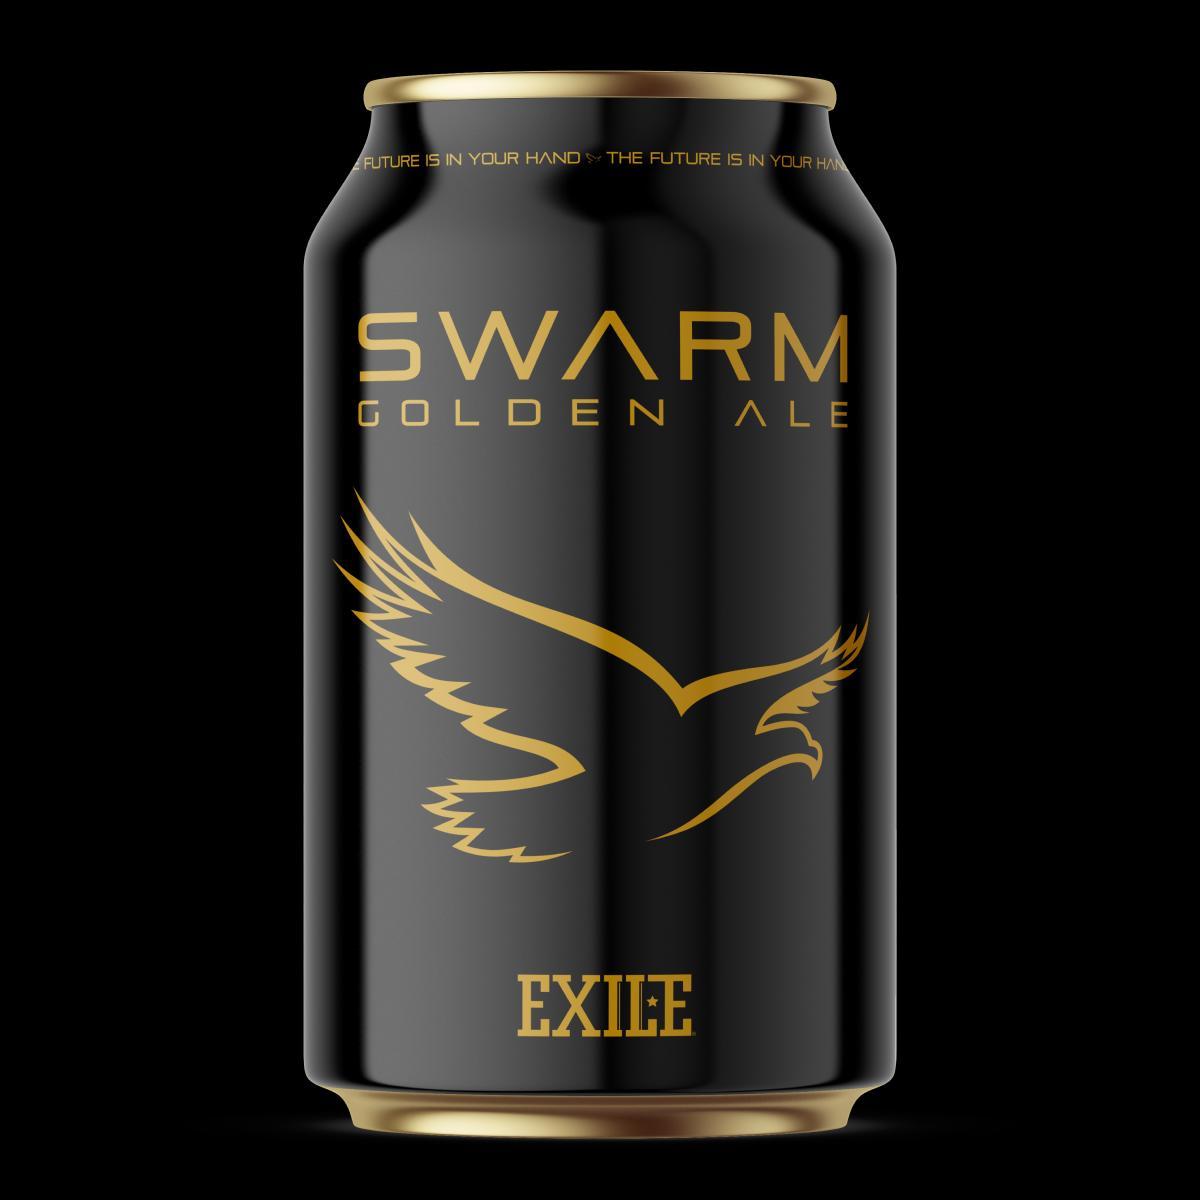 Swarm Golden Ale from Exile.